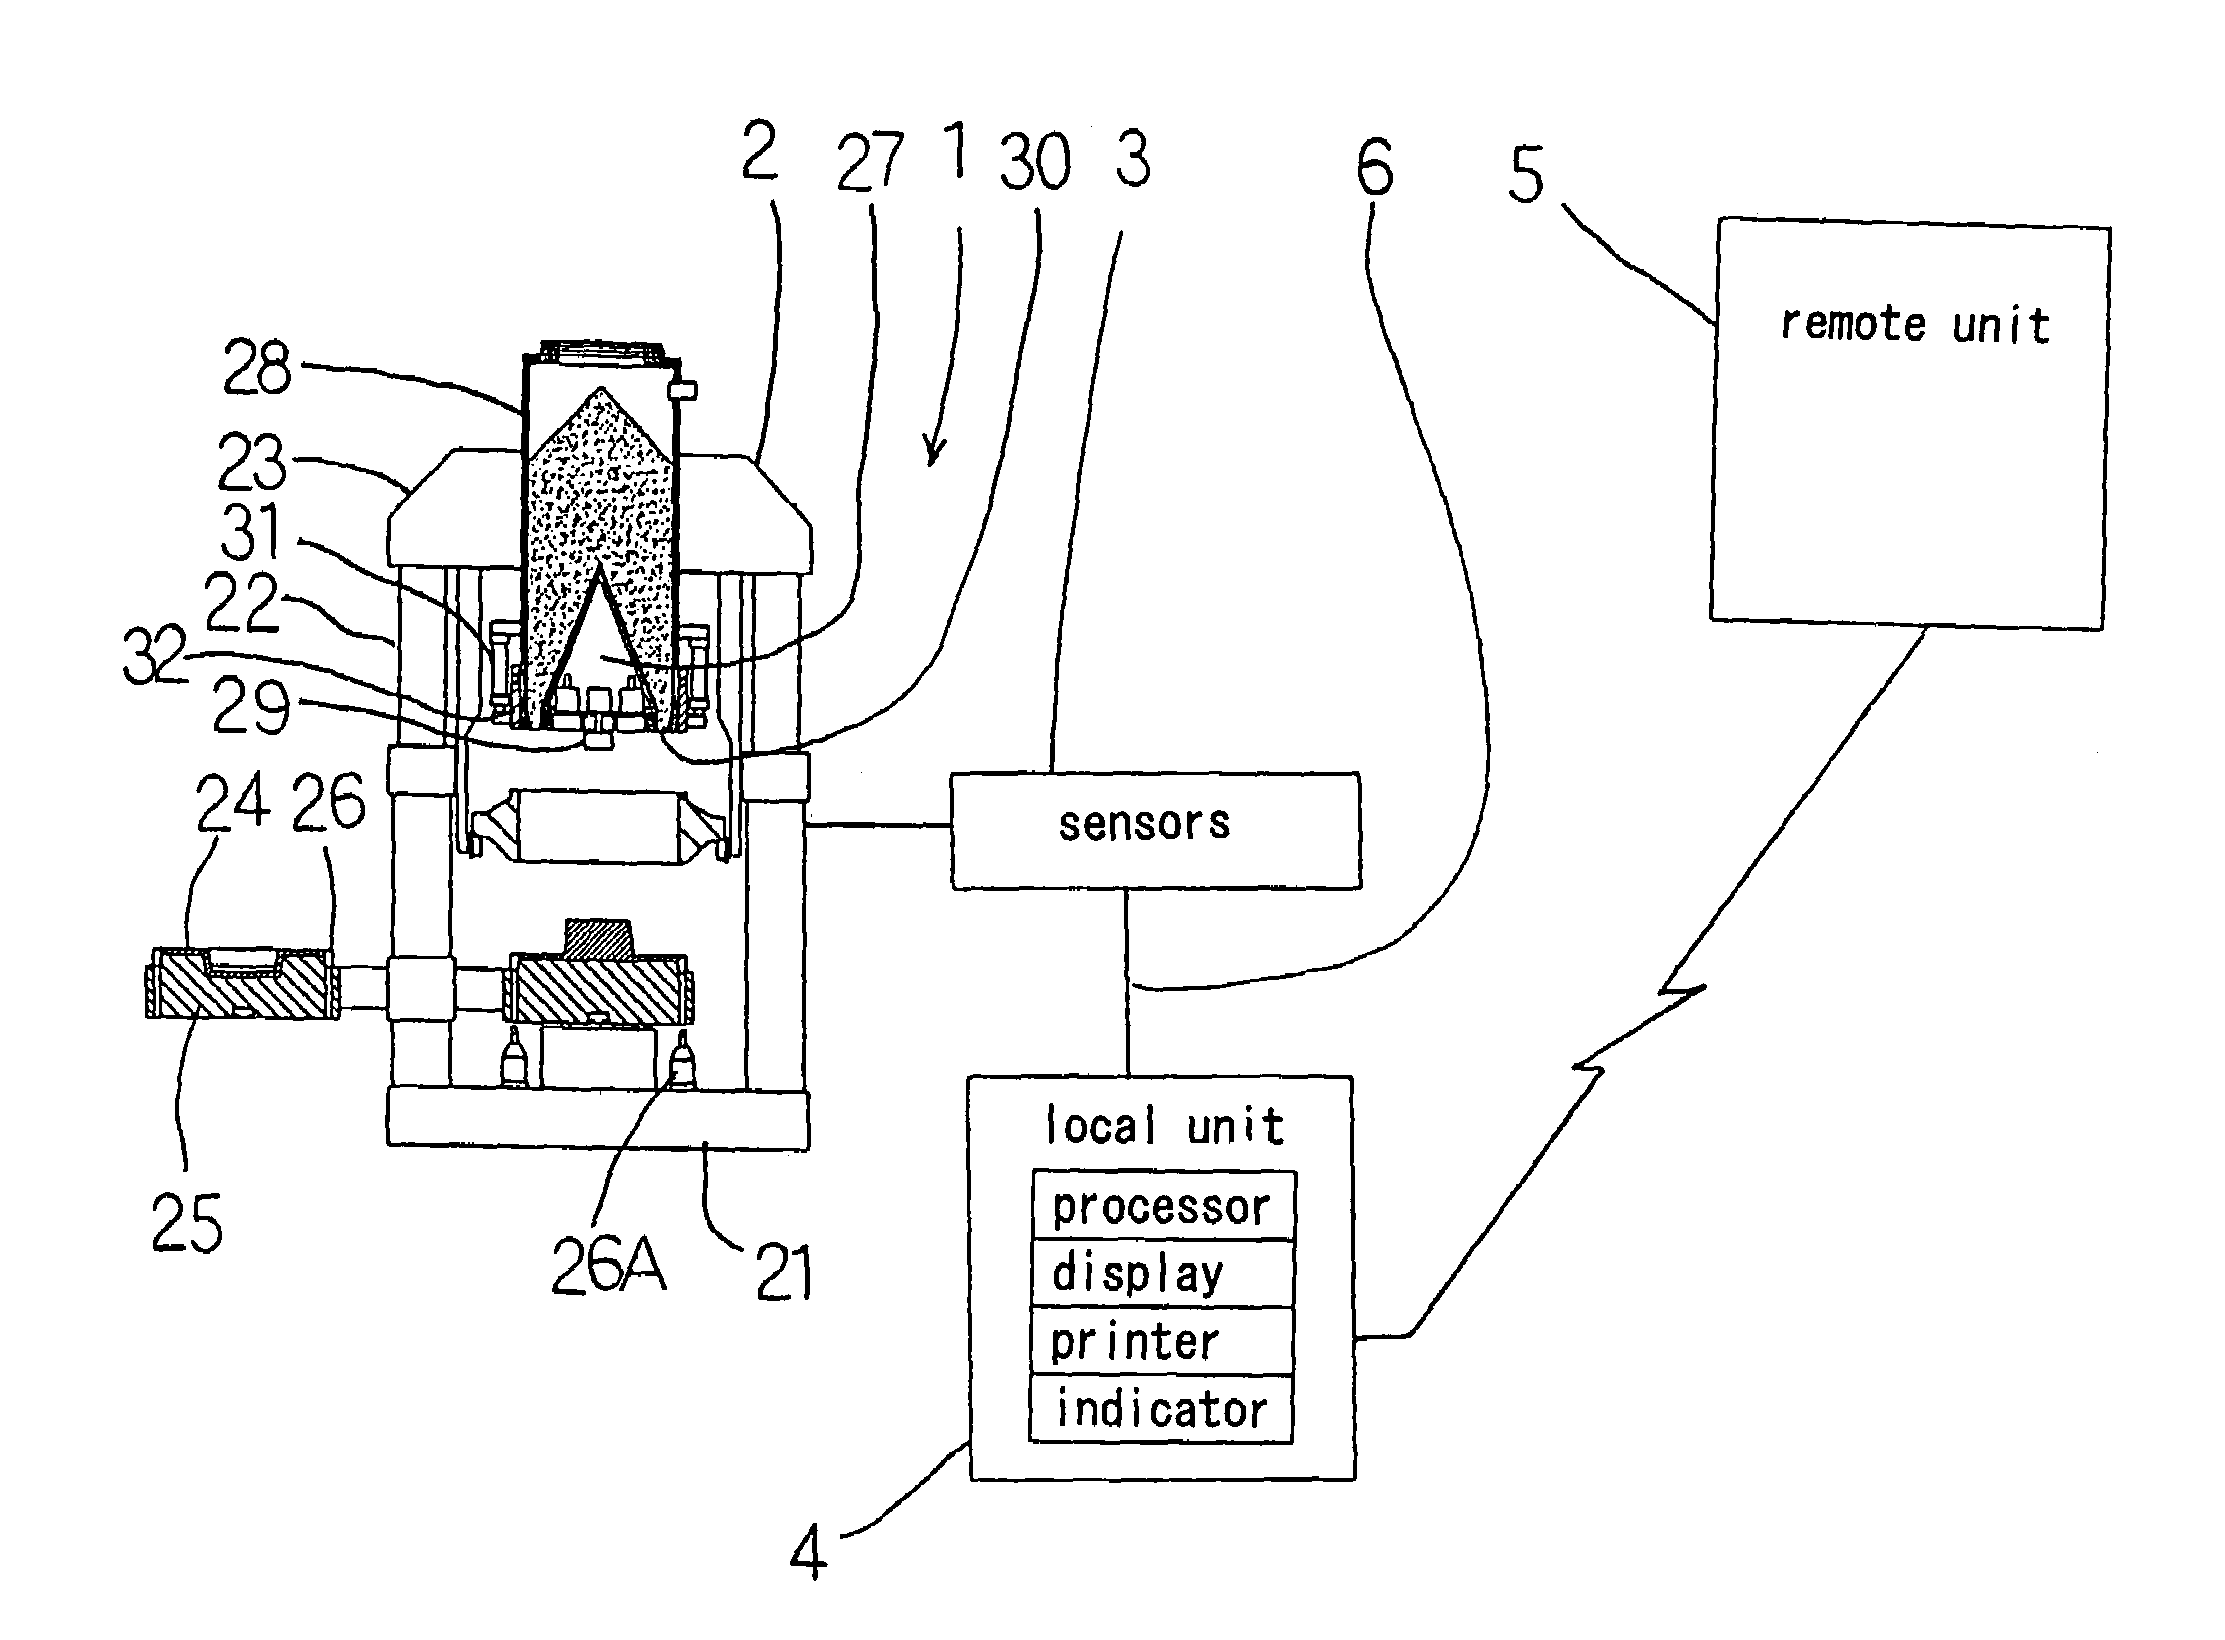 Method and system for monitoring a molding machine